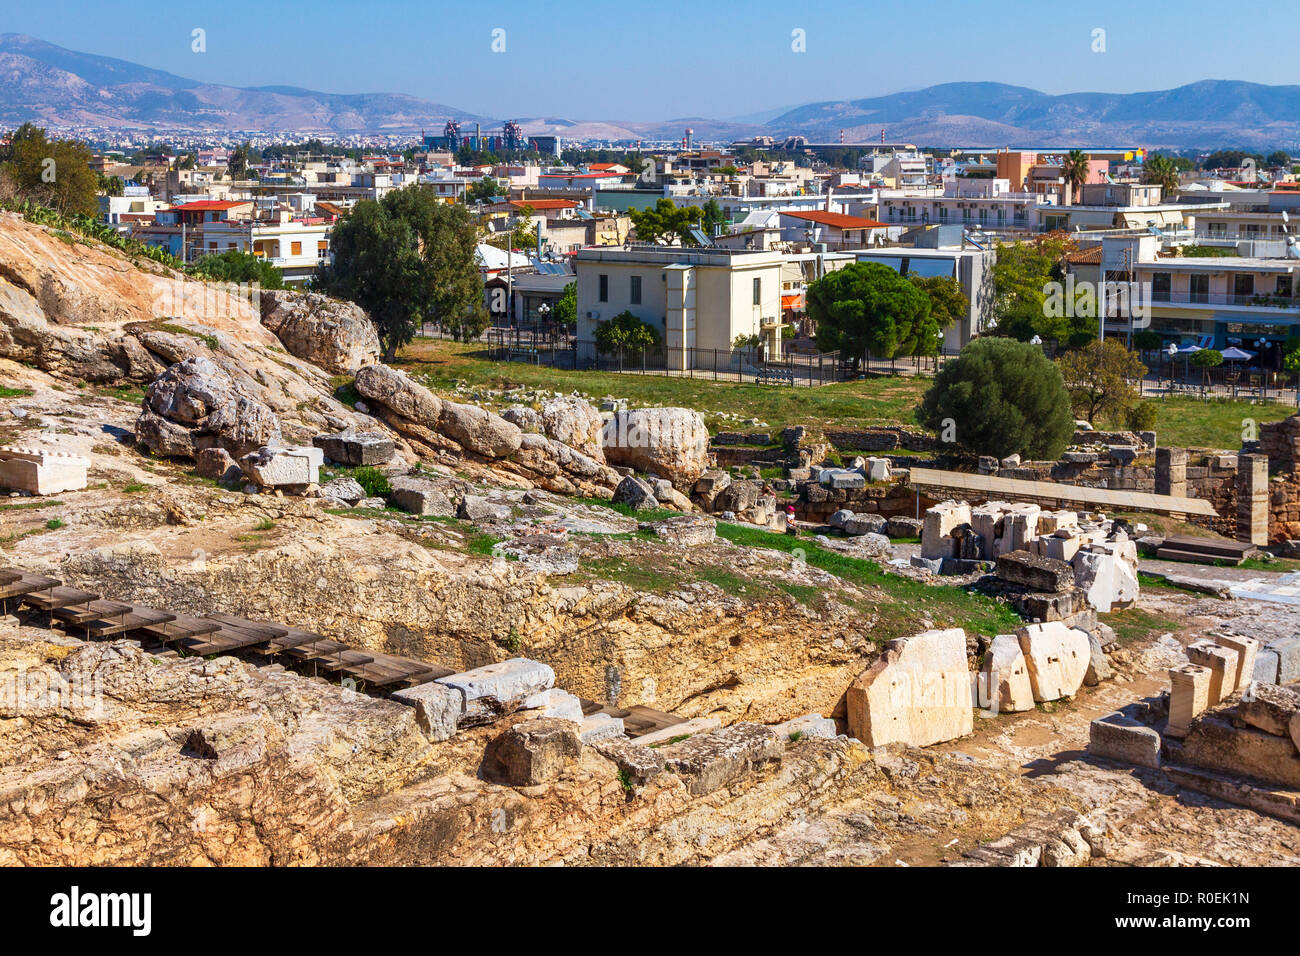 The archaeological site of Eleusis (or Eleusina), a sacred sites of ancient Greece. It was the town of Demeter, the goddess of agriculture. Stock Photo